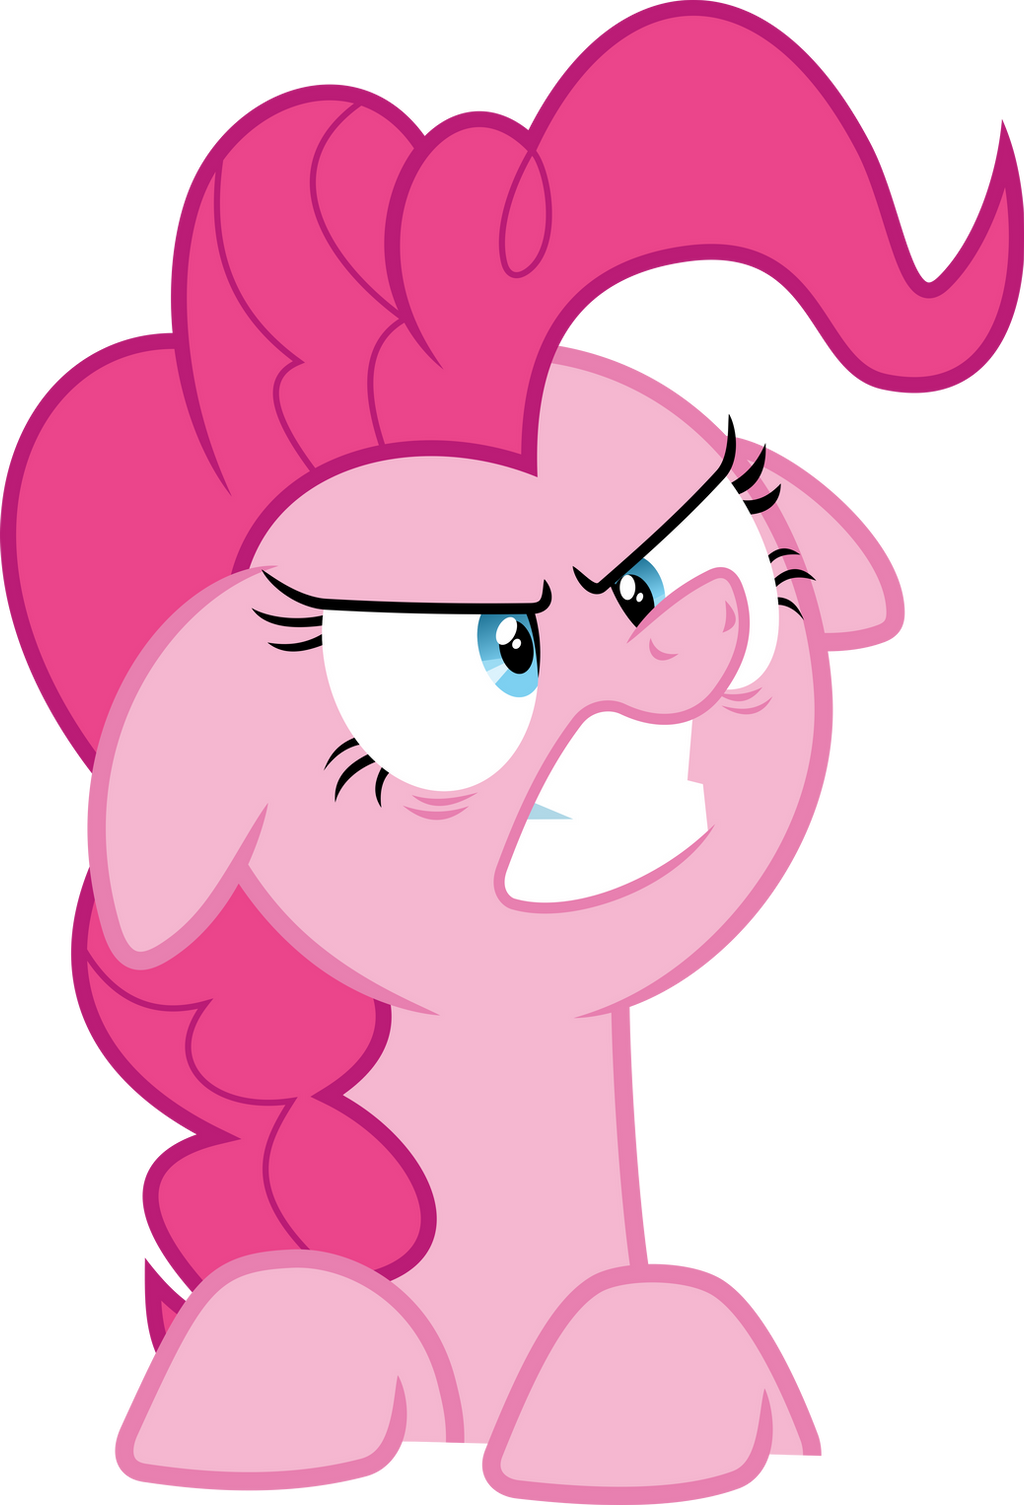 Pinkie Pie mad about the cakes S6E21